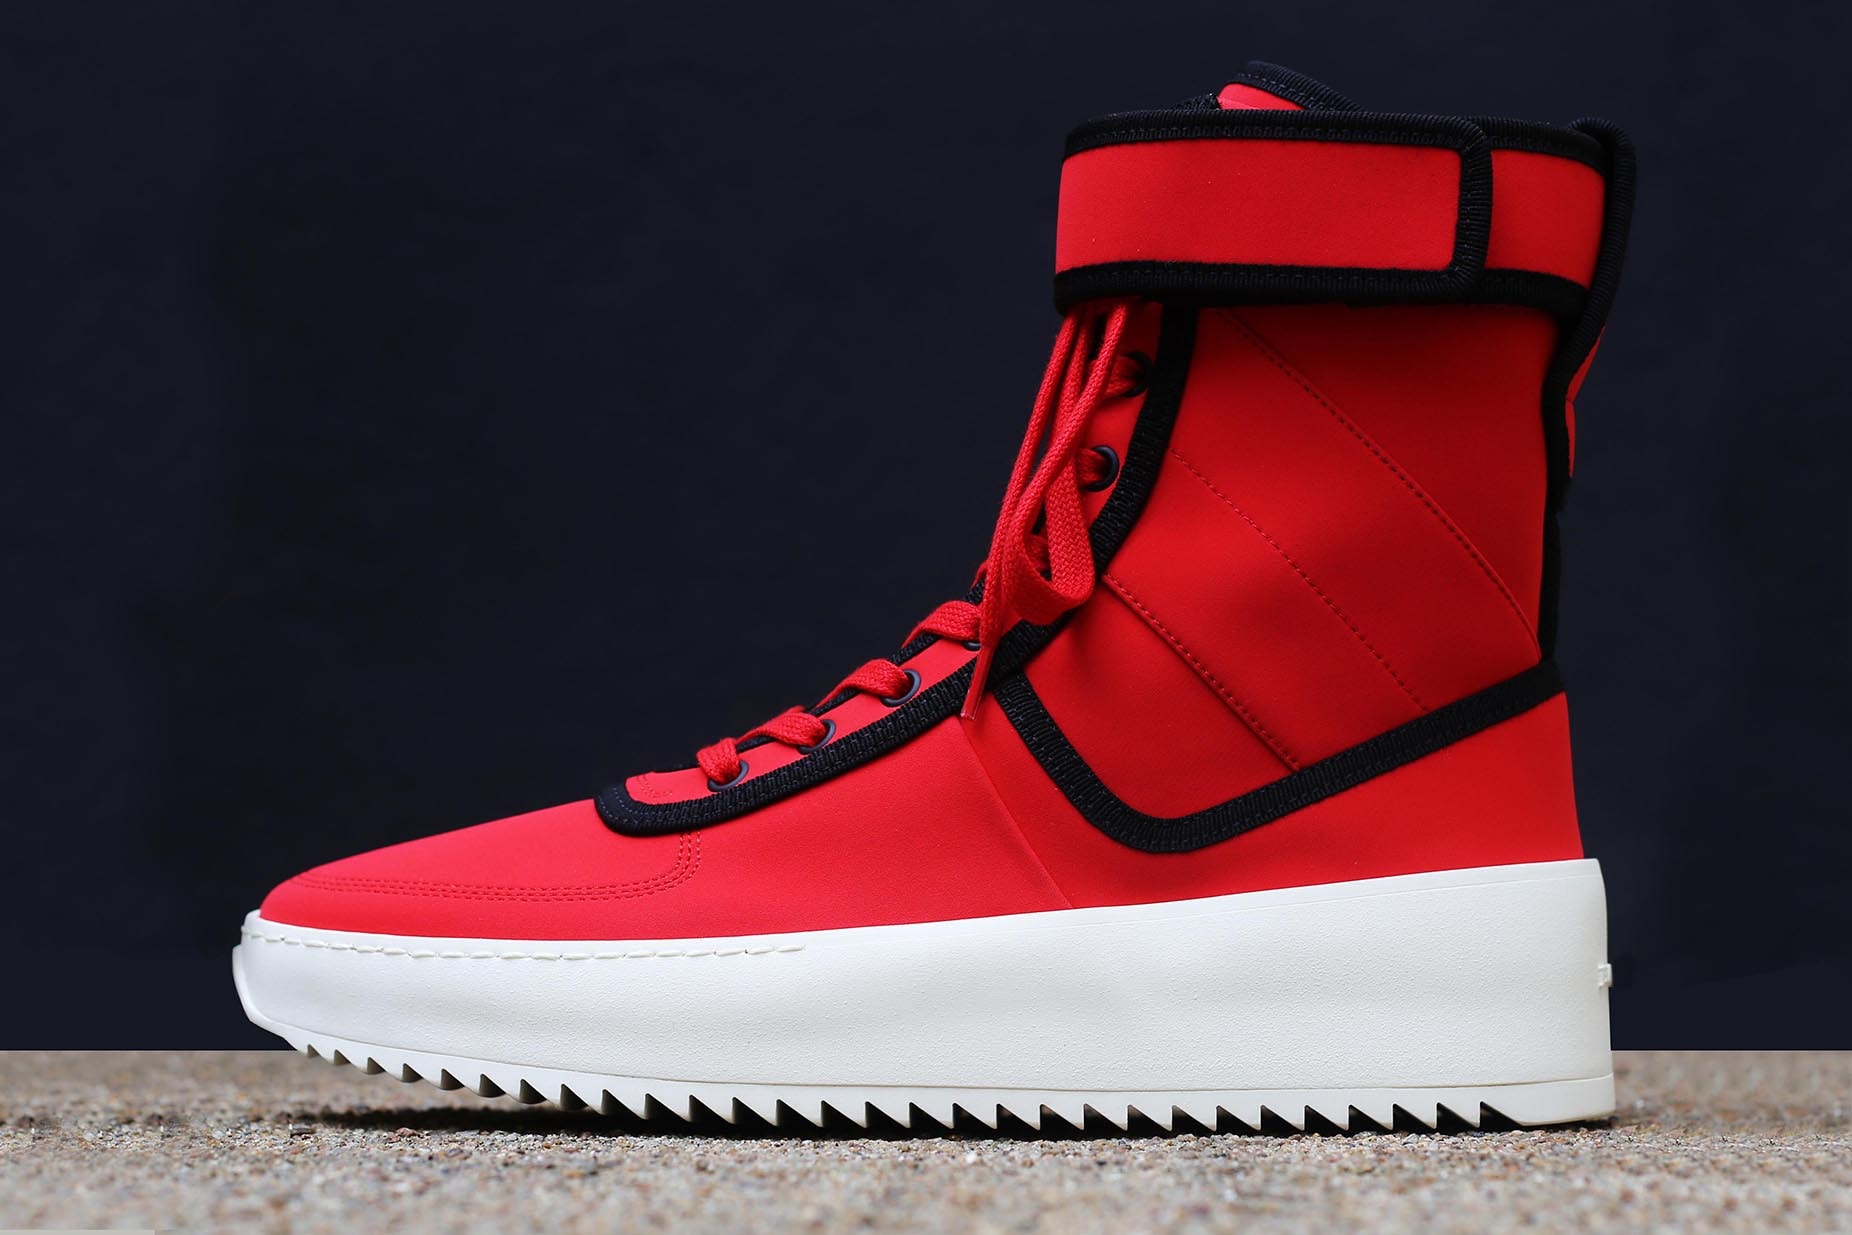 Fear of God Fifth Collection Military Sneaker Infrared Jerry Lorenzo Footwear Sneakers Sneakerboot Shoes